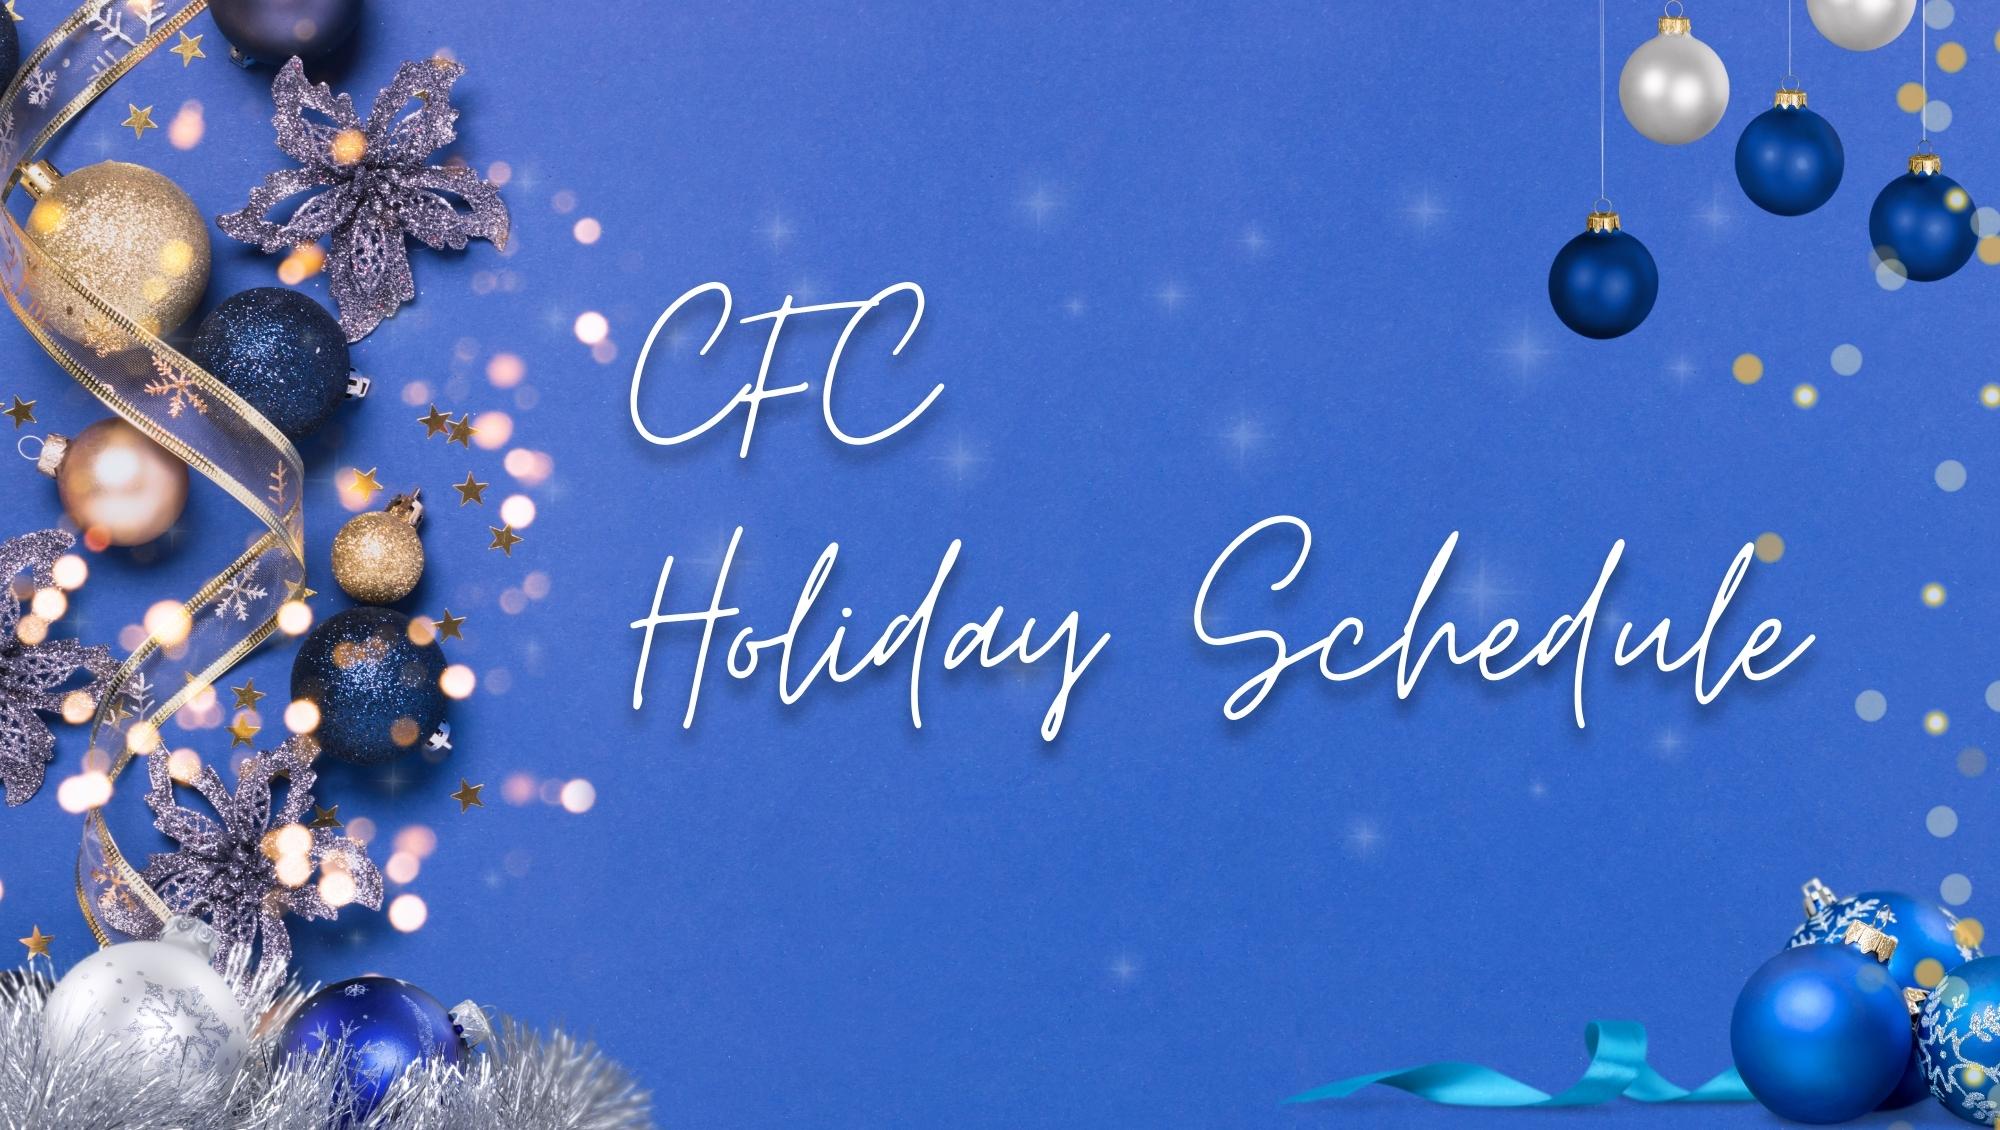 CFC Blog Holiday Schedule